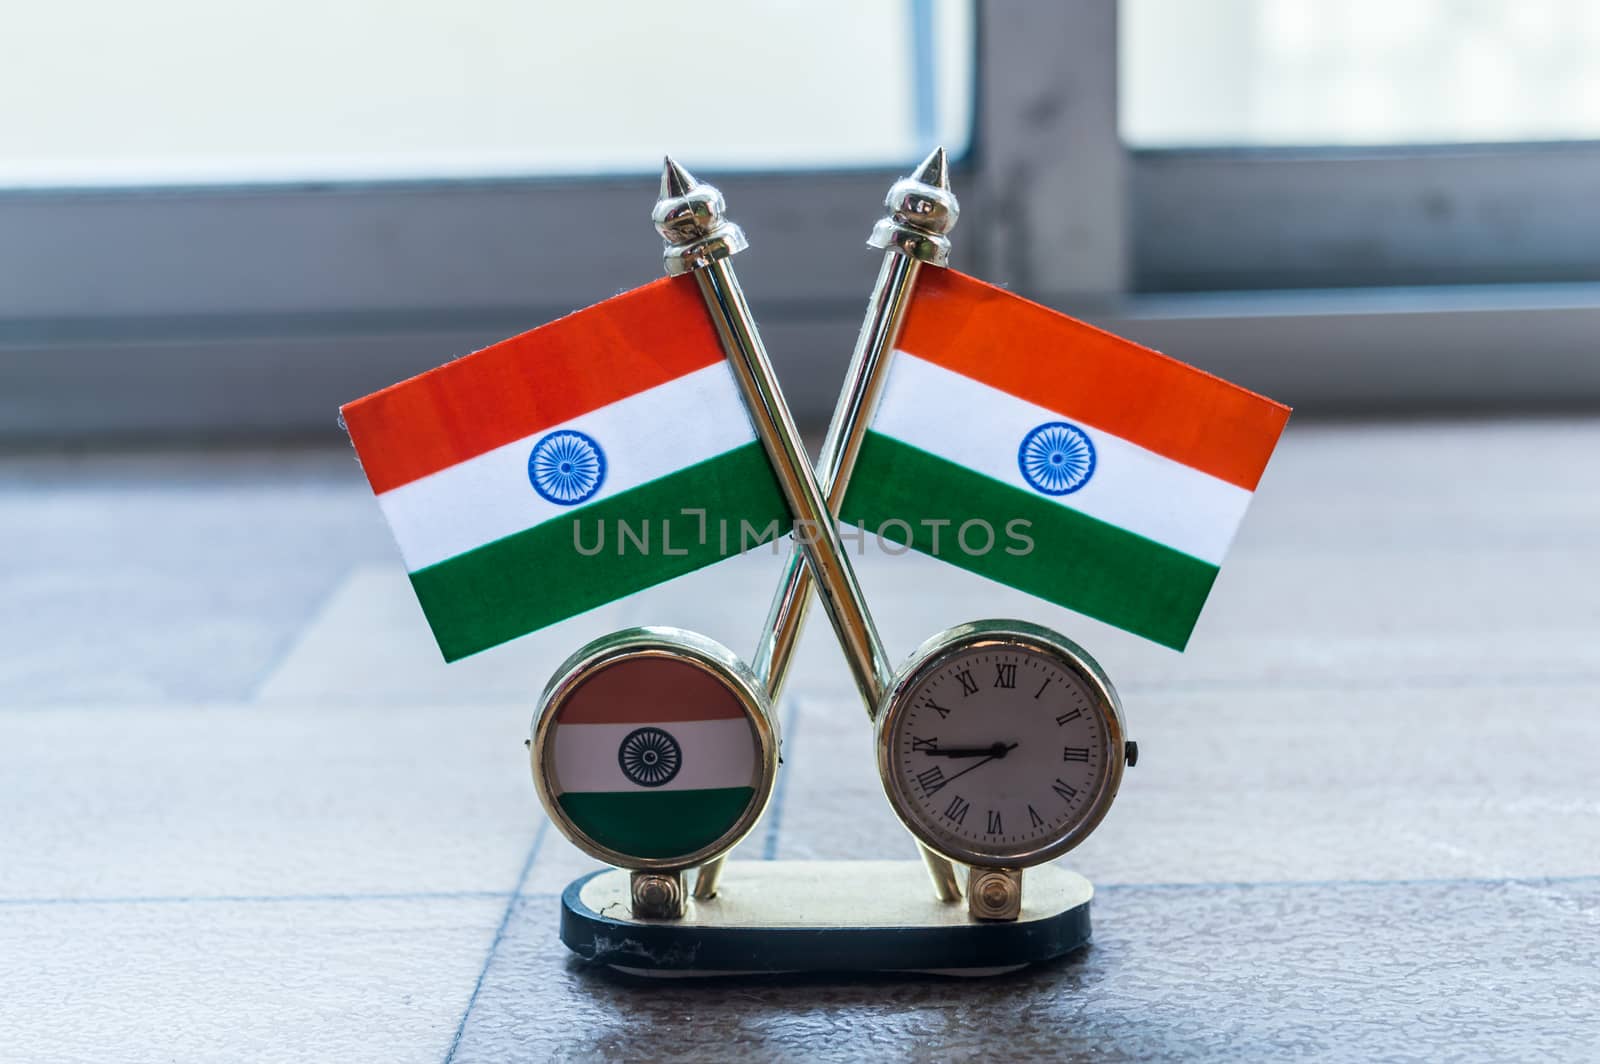 Indian flag clock. Indian Flag and Table Clock Flag. Flag with Golden Clock with Oval Shape Stand useful for Car Dashboard Desk Office Table Decoration. Home Decor Use and Gift object.